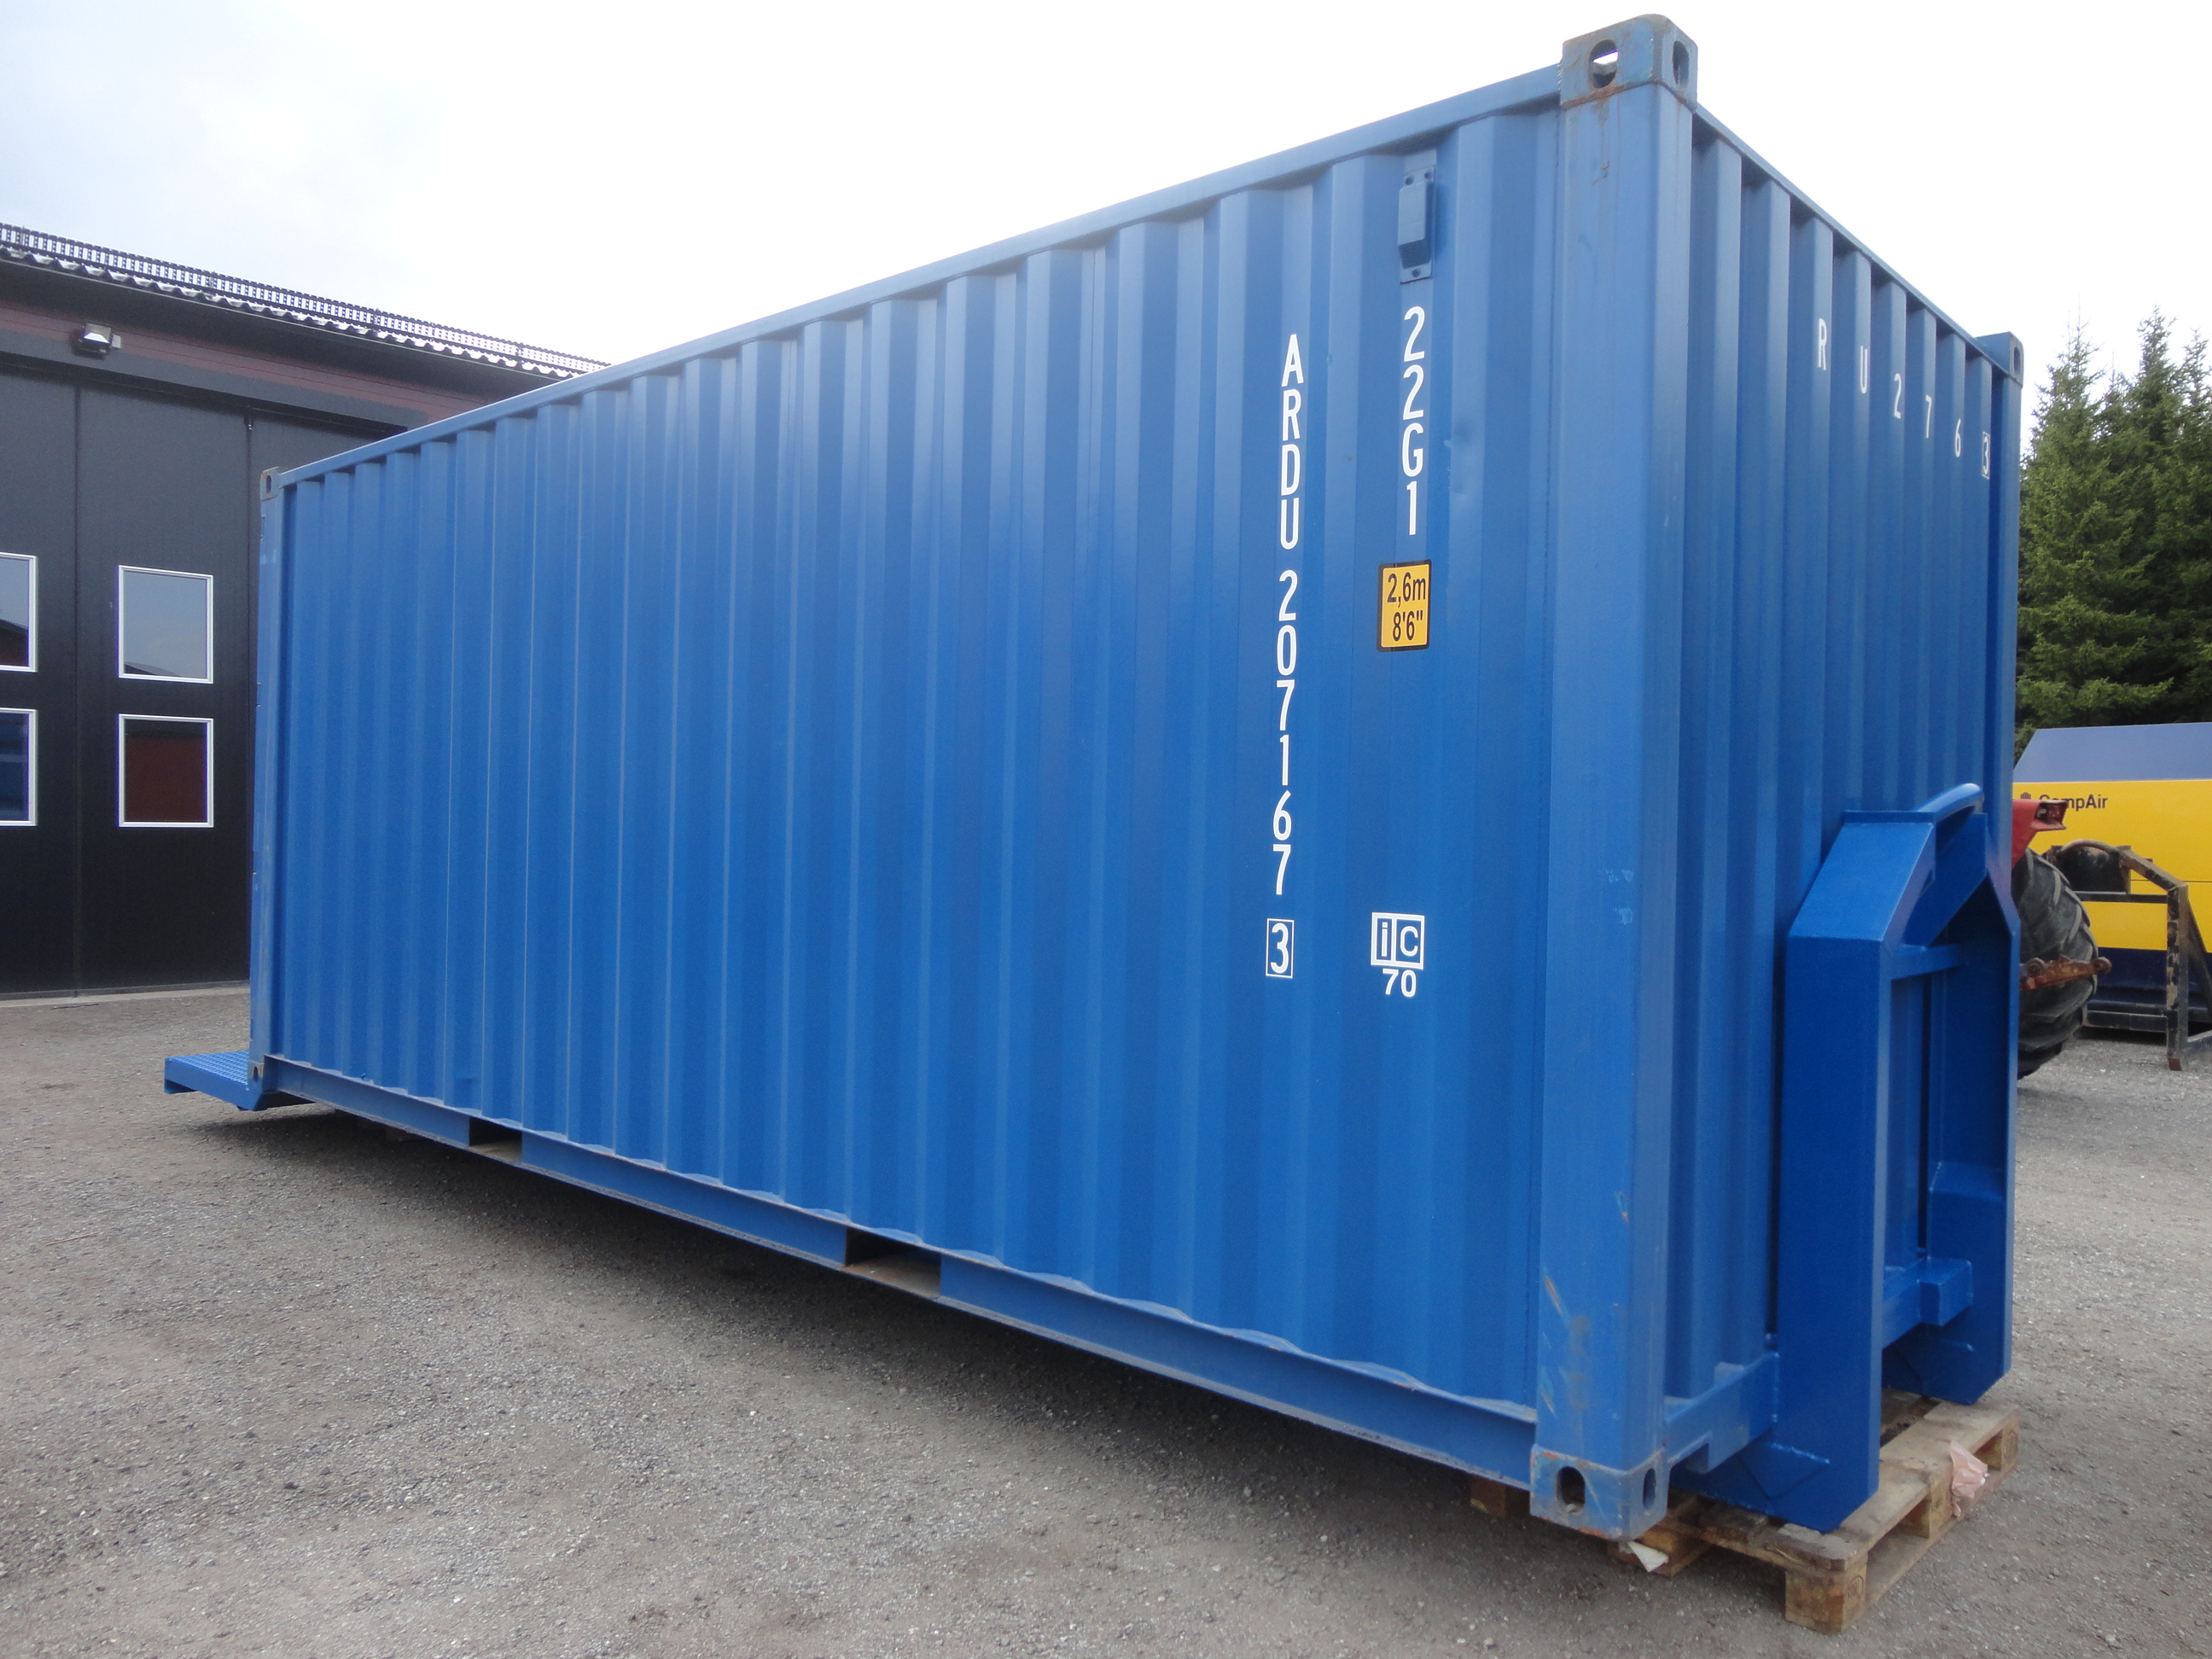 Containerspecial 7m ram 001